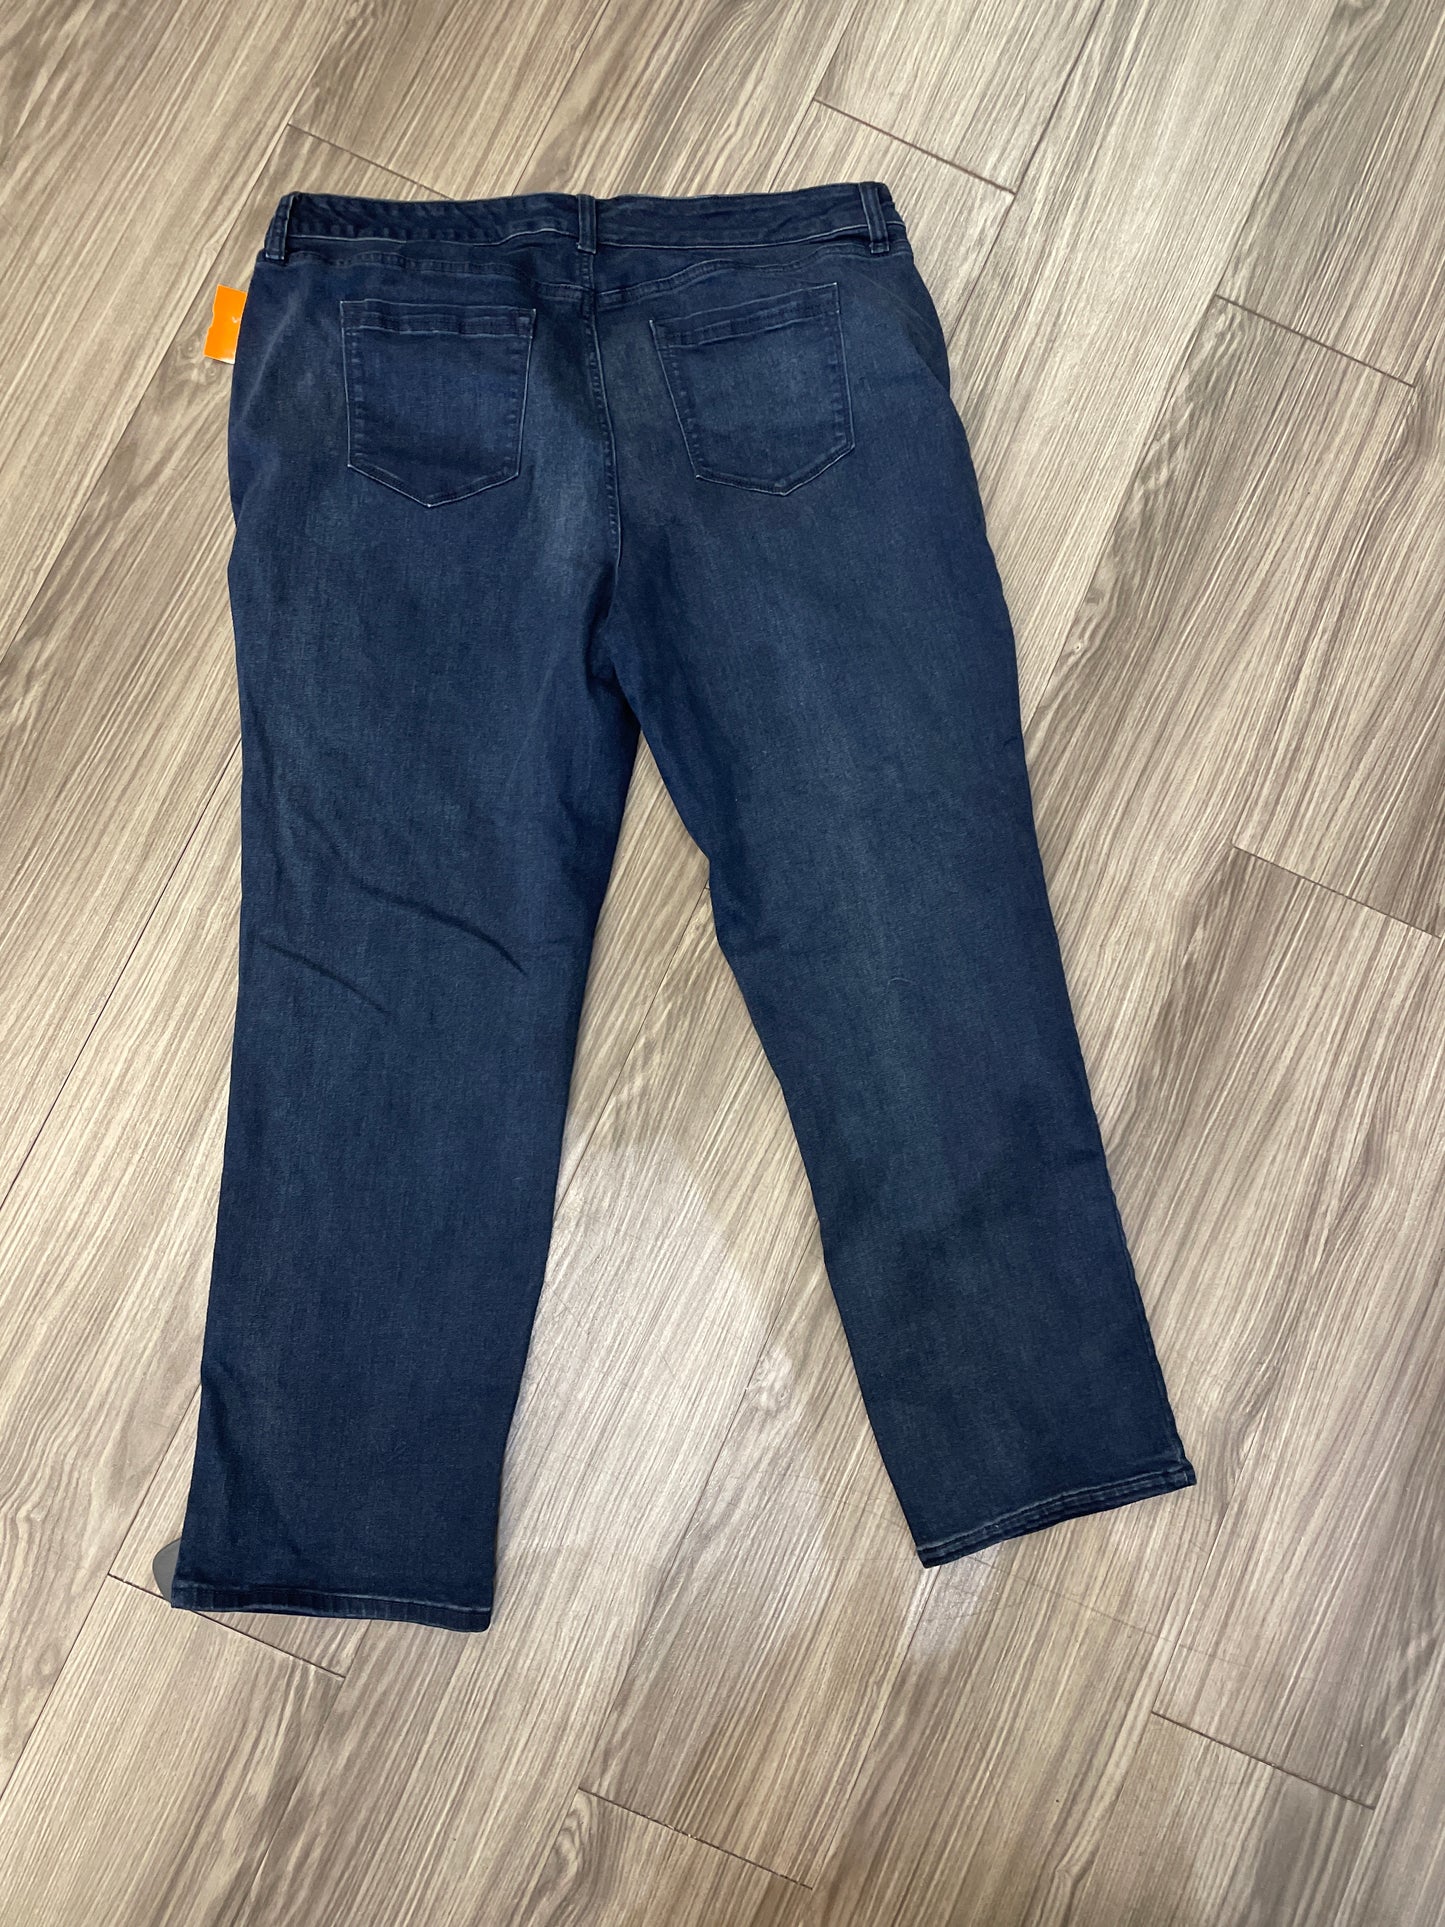 Jeans Boot Cut By Croft And Barrow  Size: 16